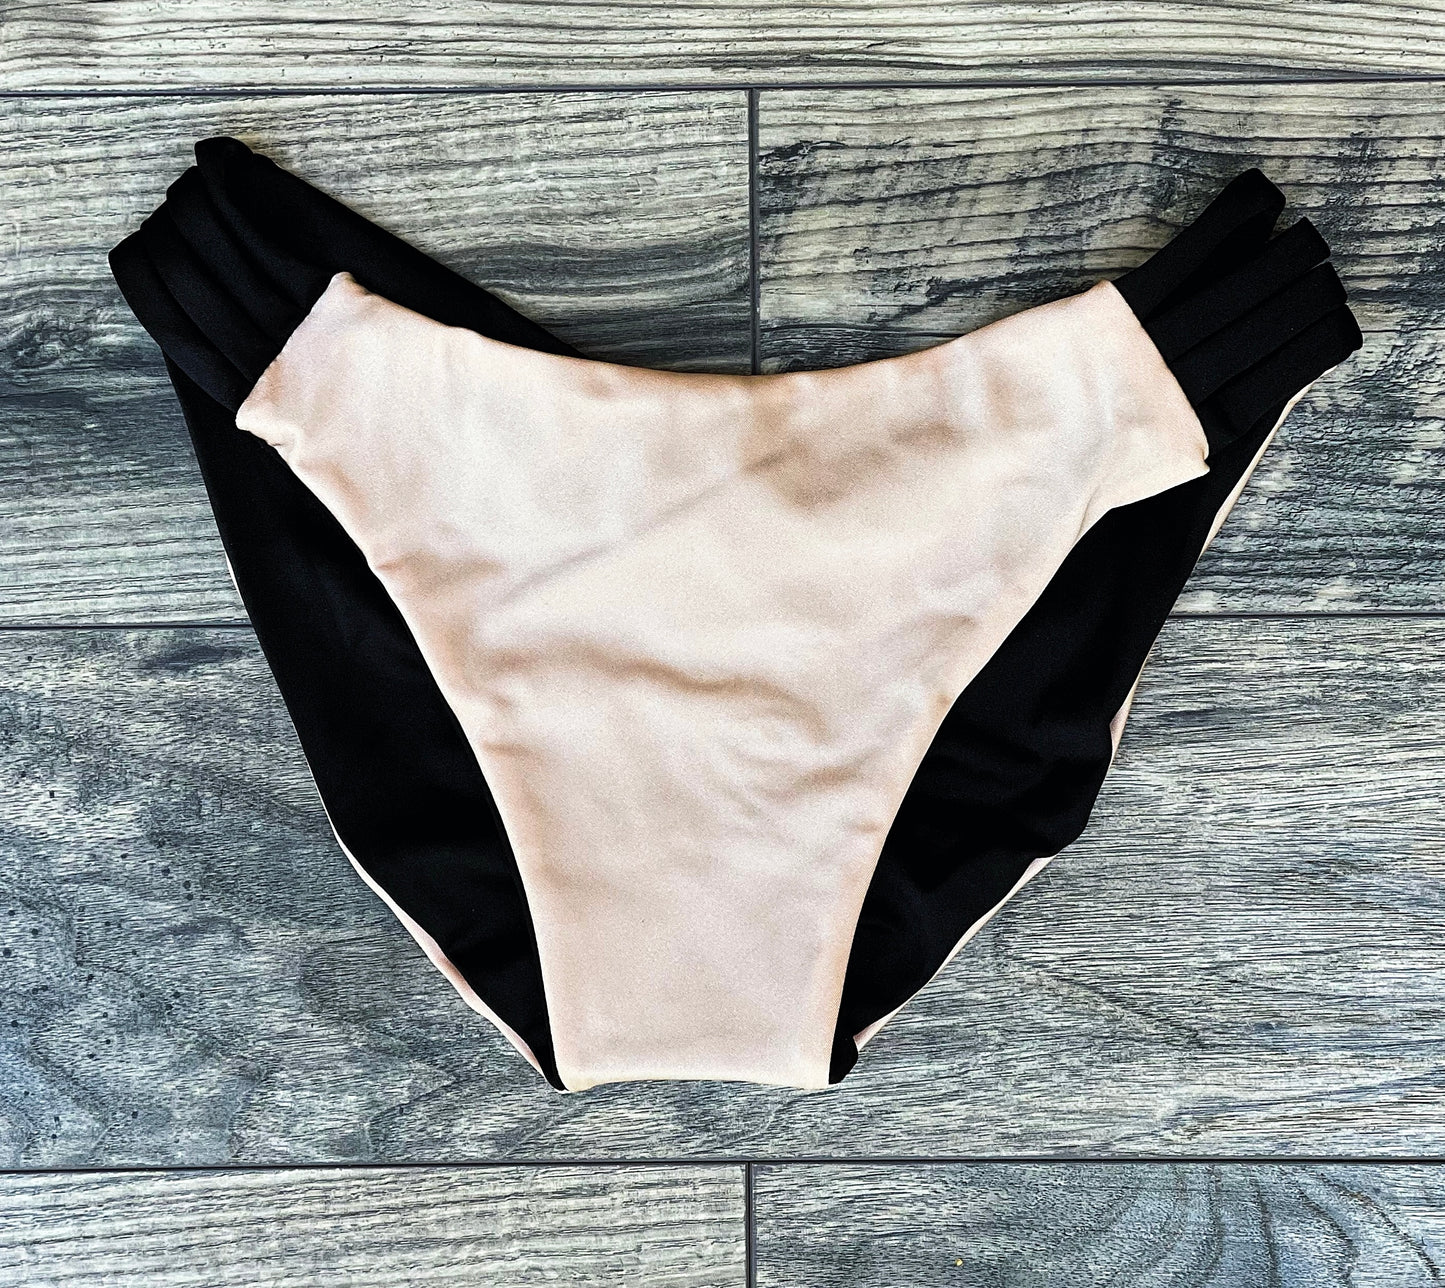 Reversible Nude Blush and Black Bottoms